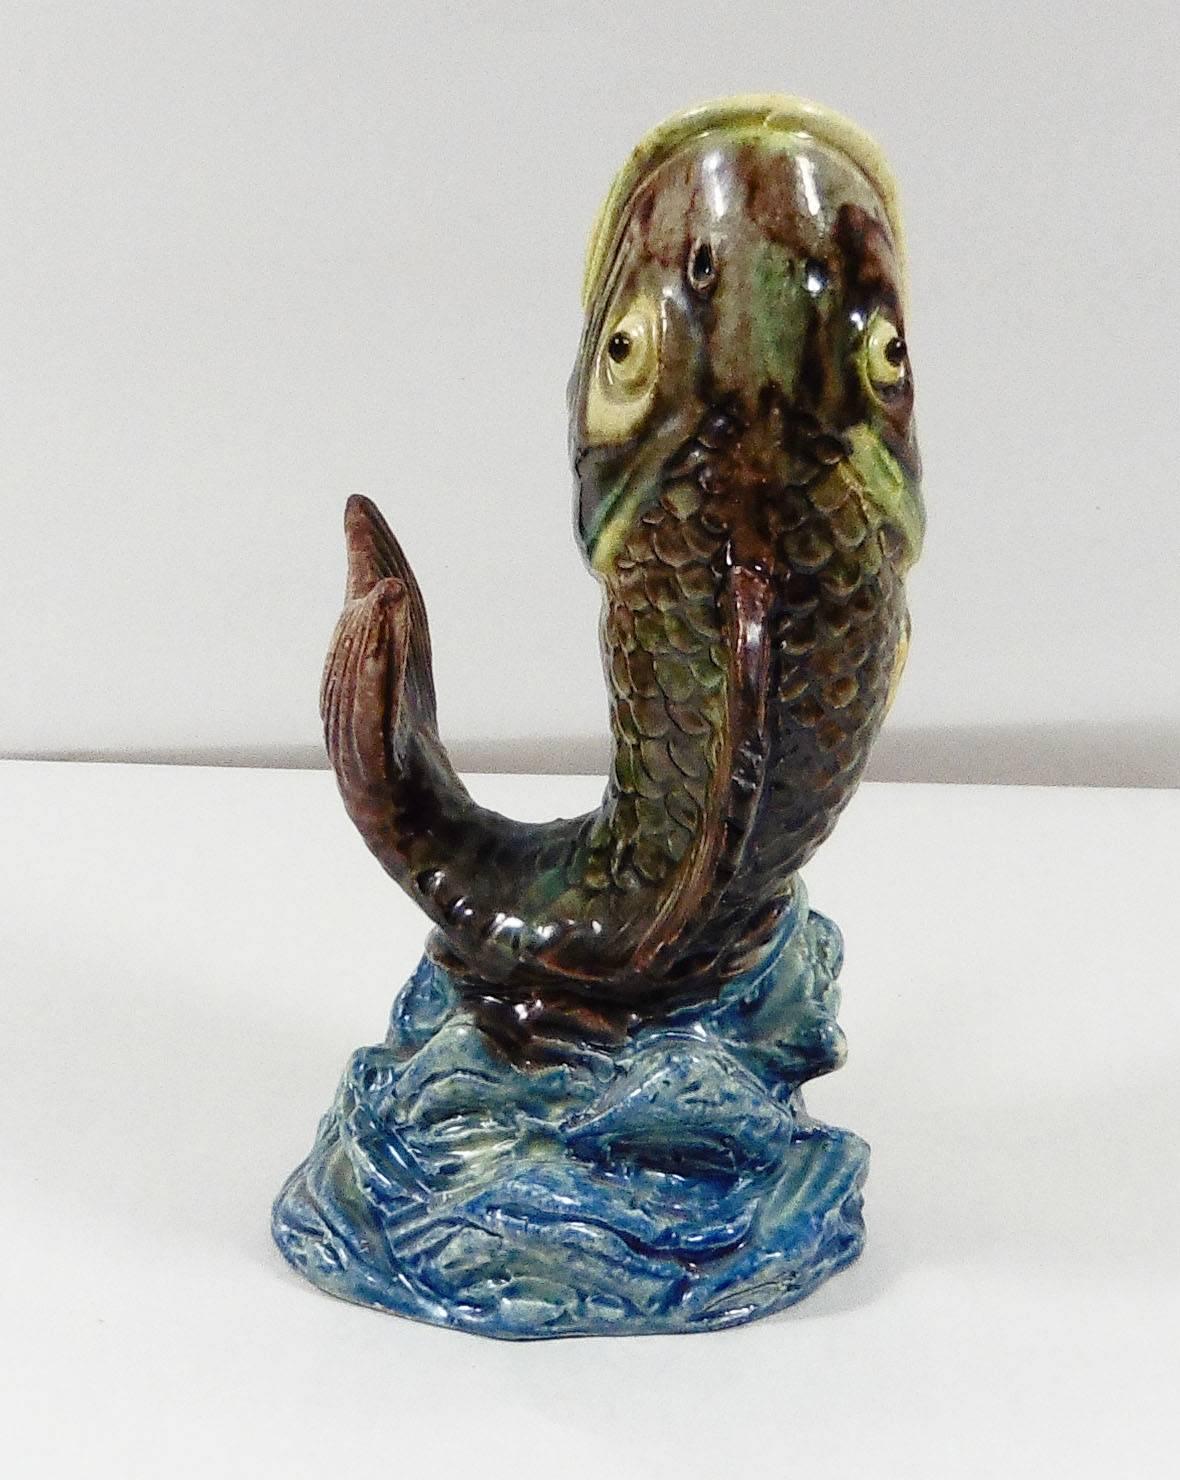 Small Palissy fish vase circa 1890 attributed to Thomas Sergent.
Thomas Victor Sergent was an active member of the School of Paris with others ceramists he made platters and other several others pieces like vases, tobacco jars, jardinières. He